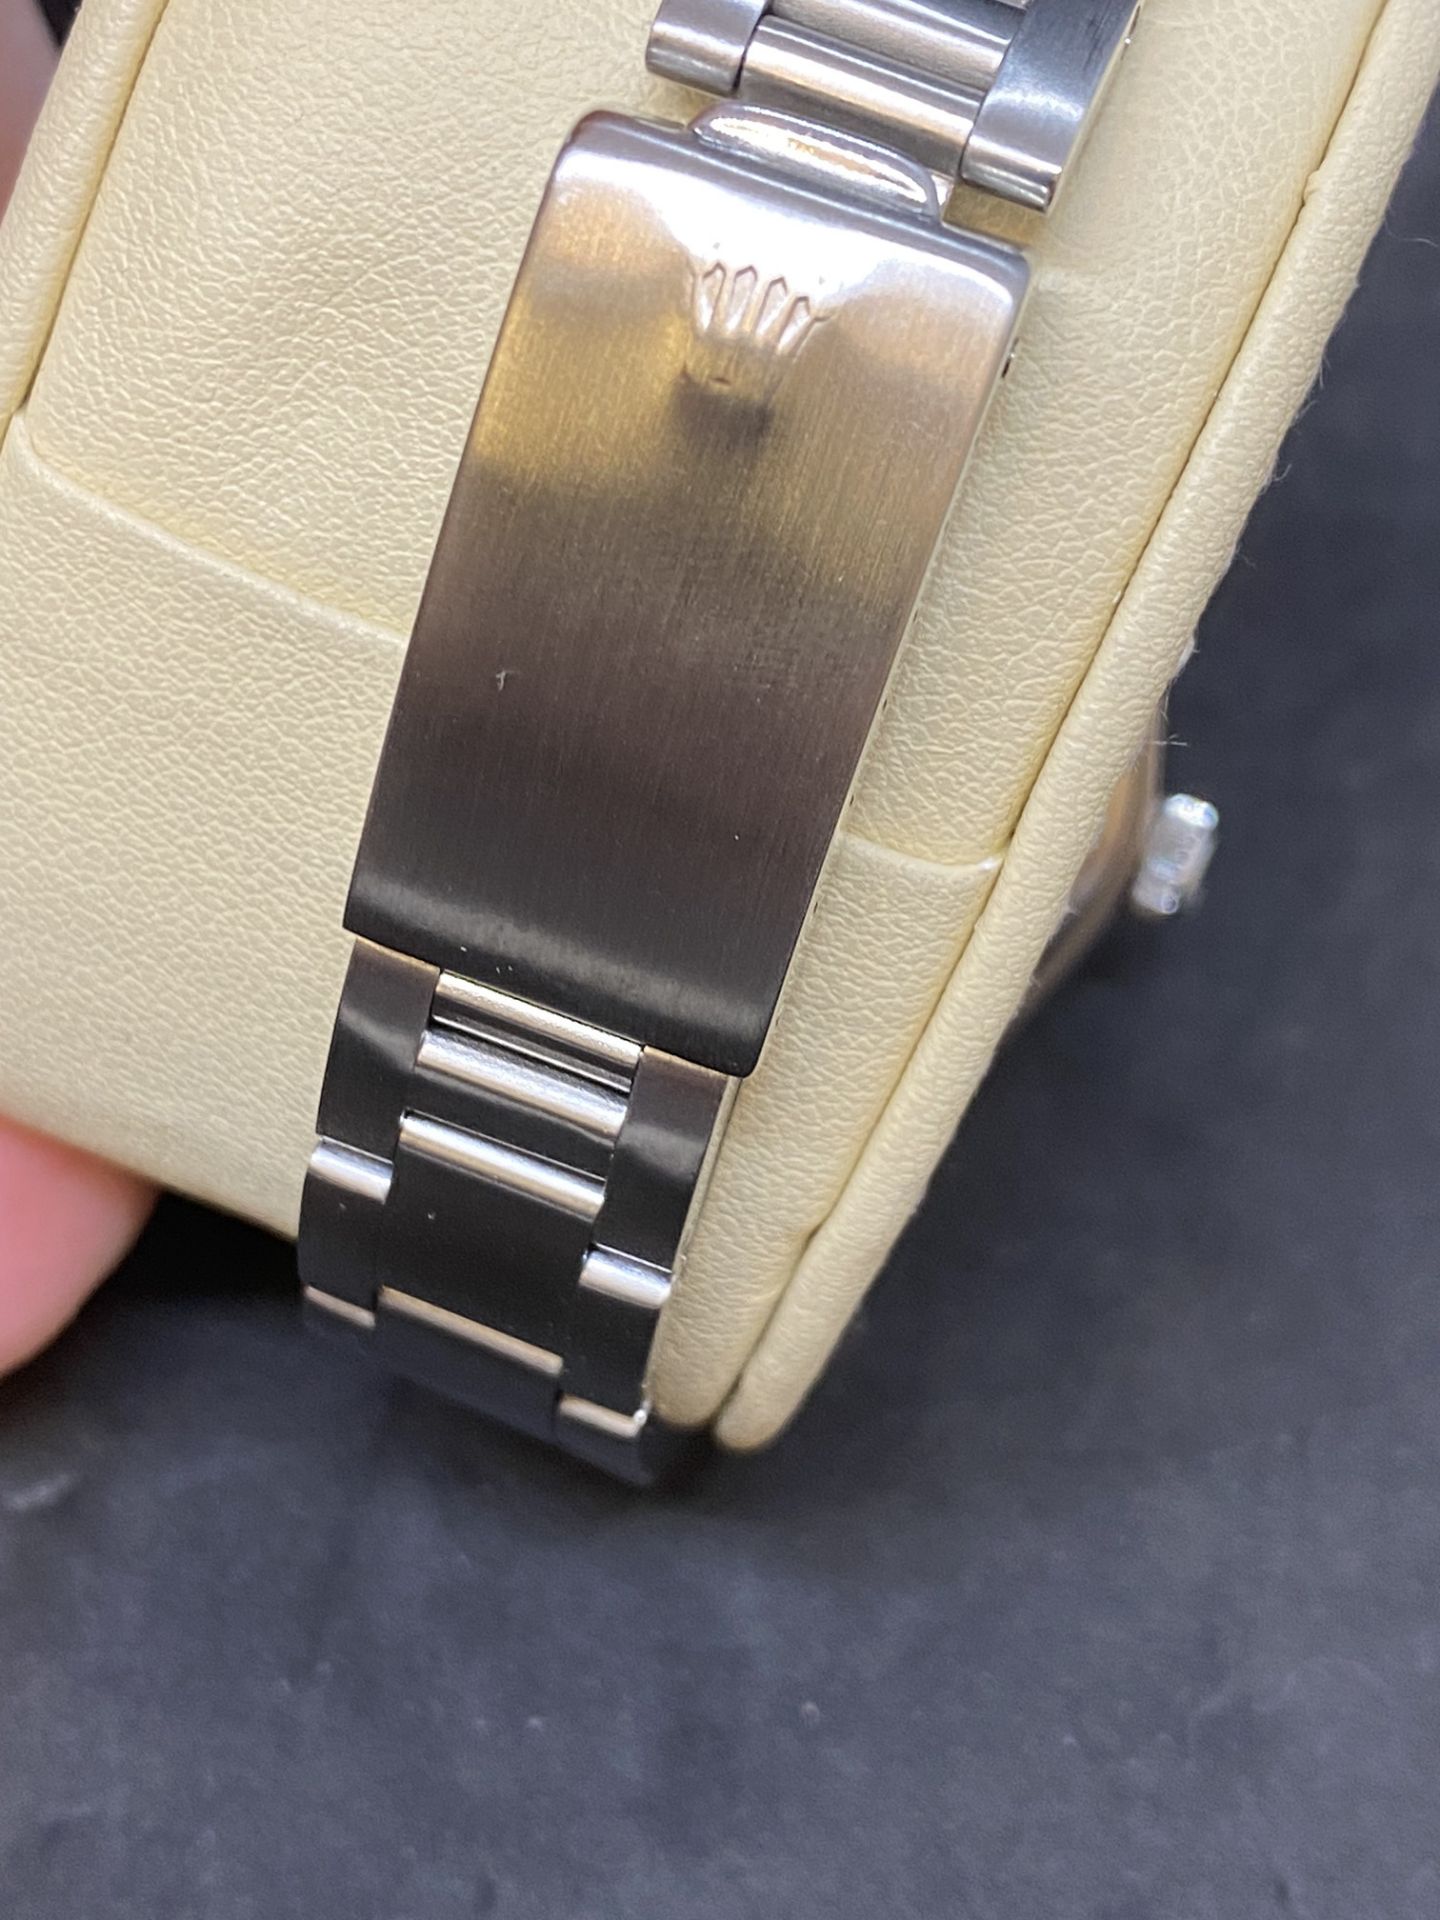 STAINLESS STEEL ROLEX OYSTER PERPETUAL DATE WATCH - Image 7 of 11